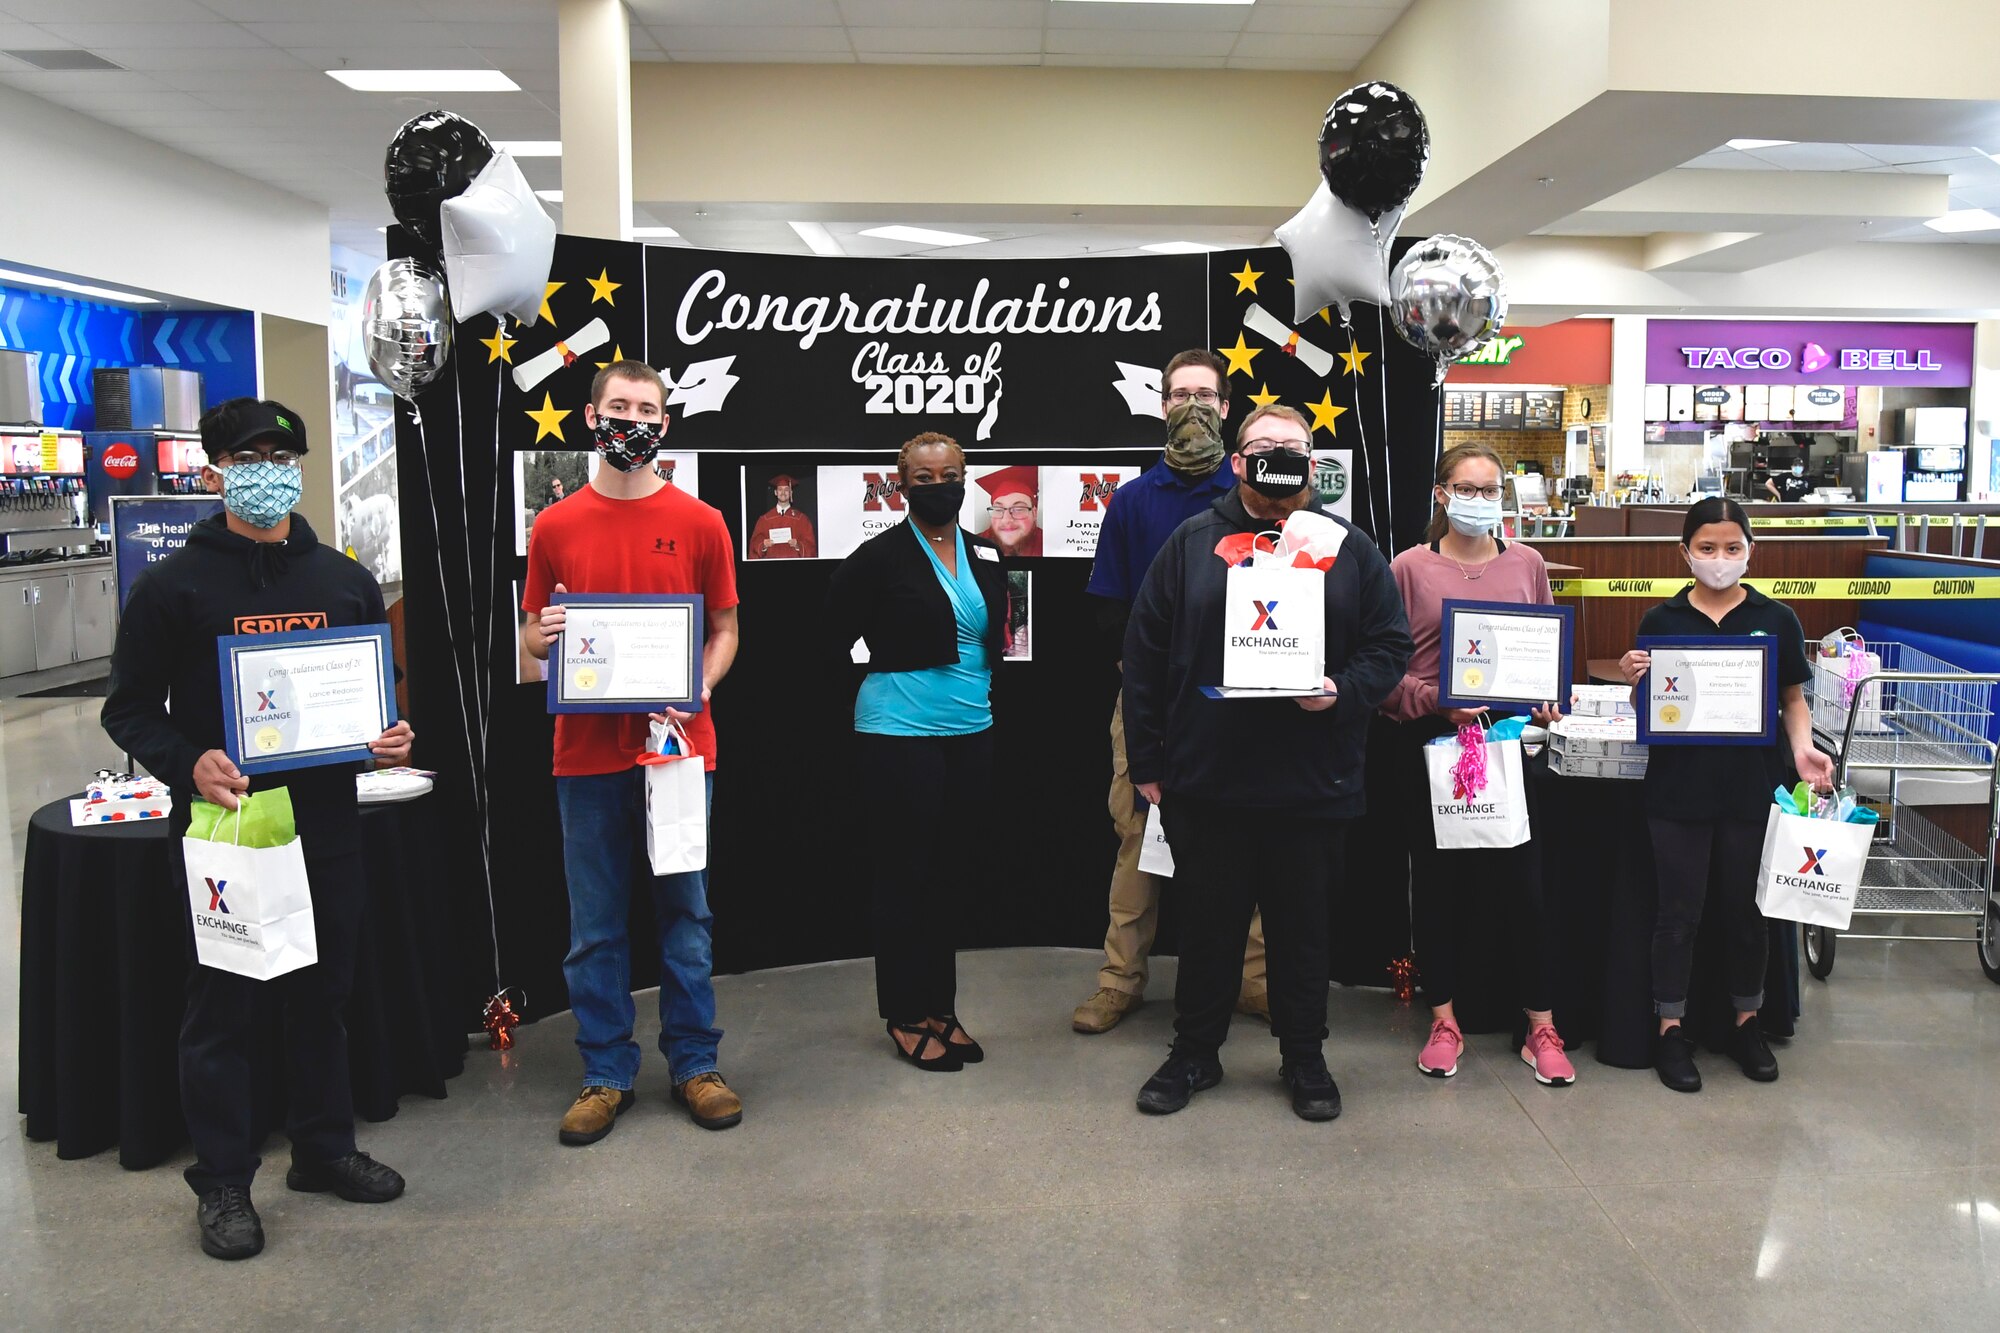 Melanie White, AAFES general manager, and seven student employees pose for a group photo with their recognition certificates.